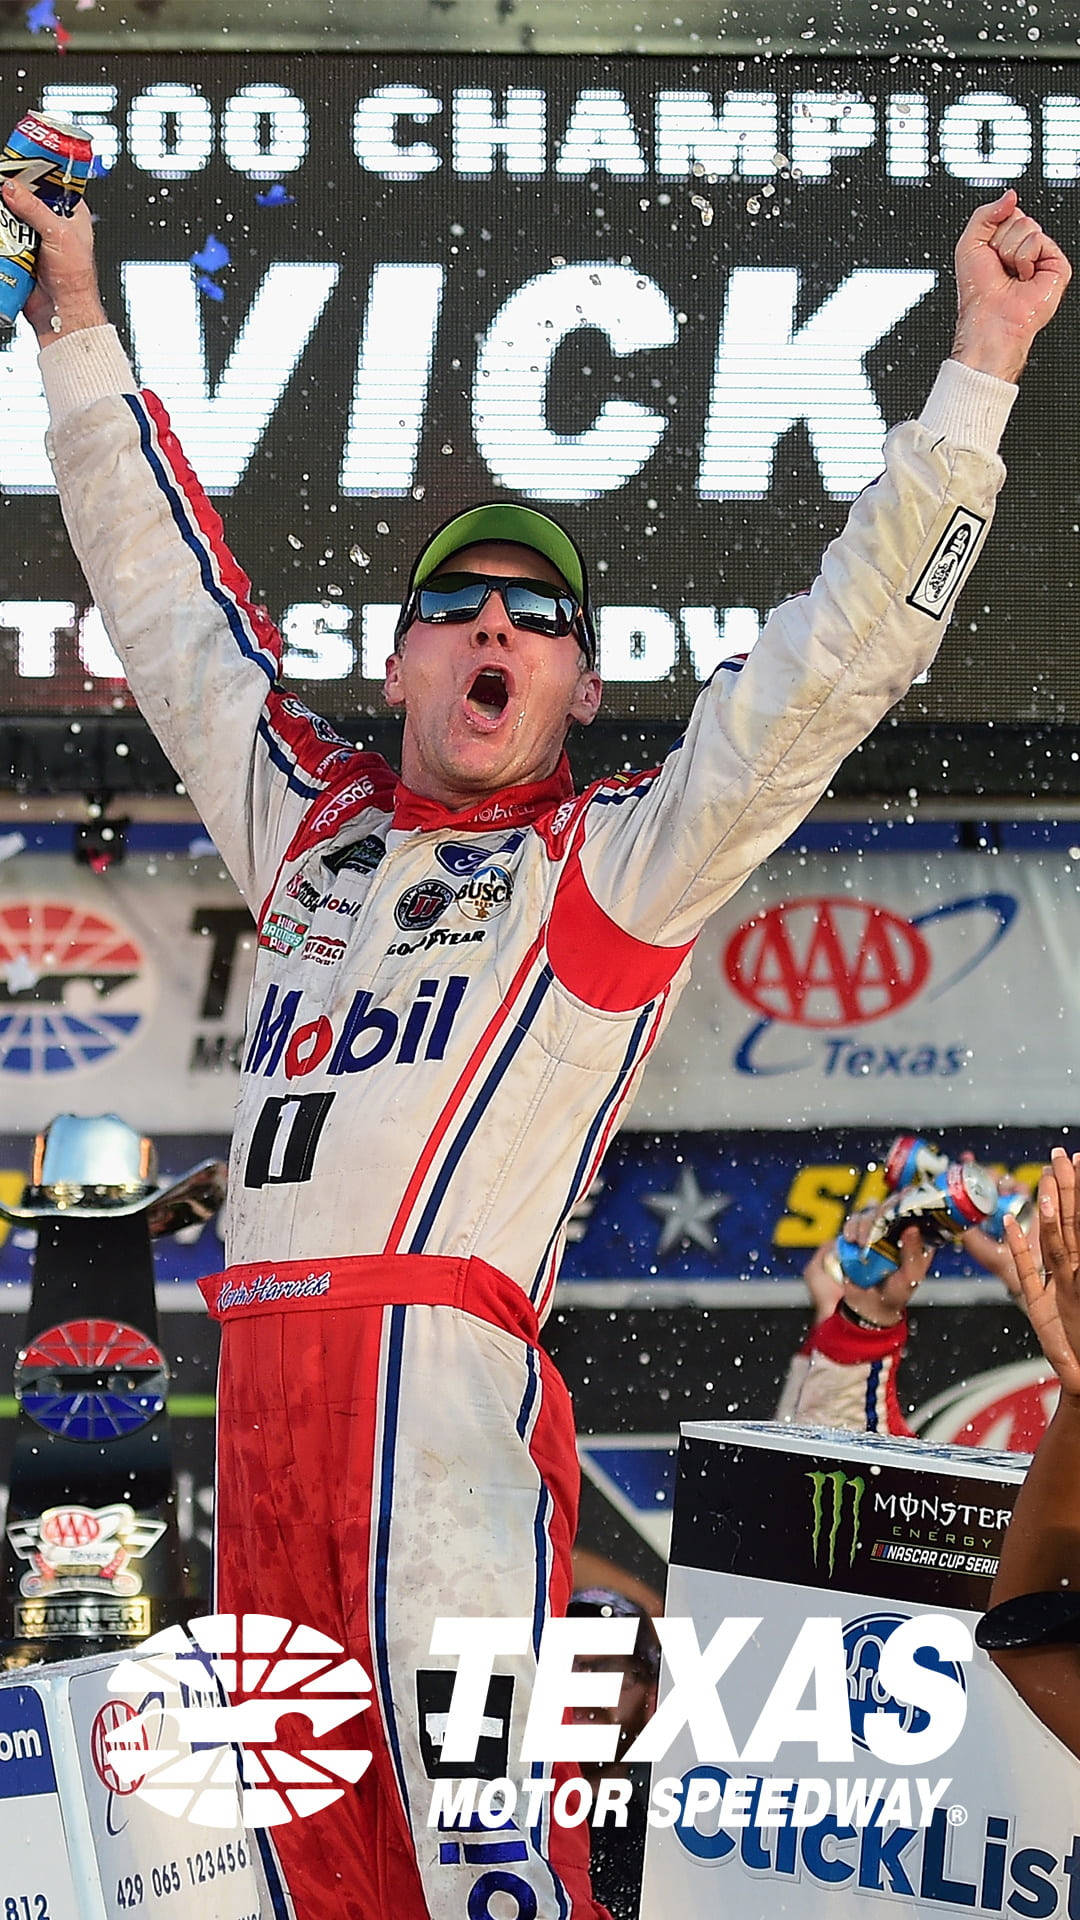 Victory celebration - Kevin Harvick raising his arms in triumph Wallpaper